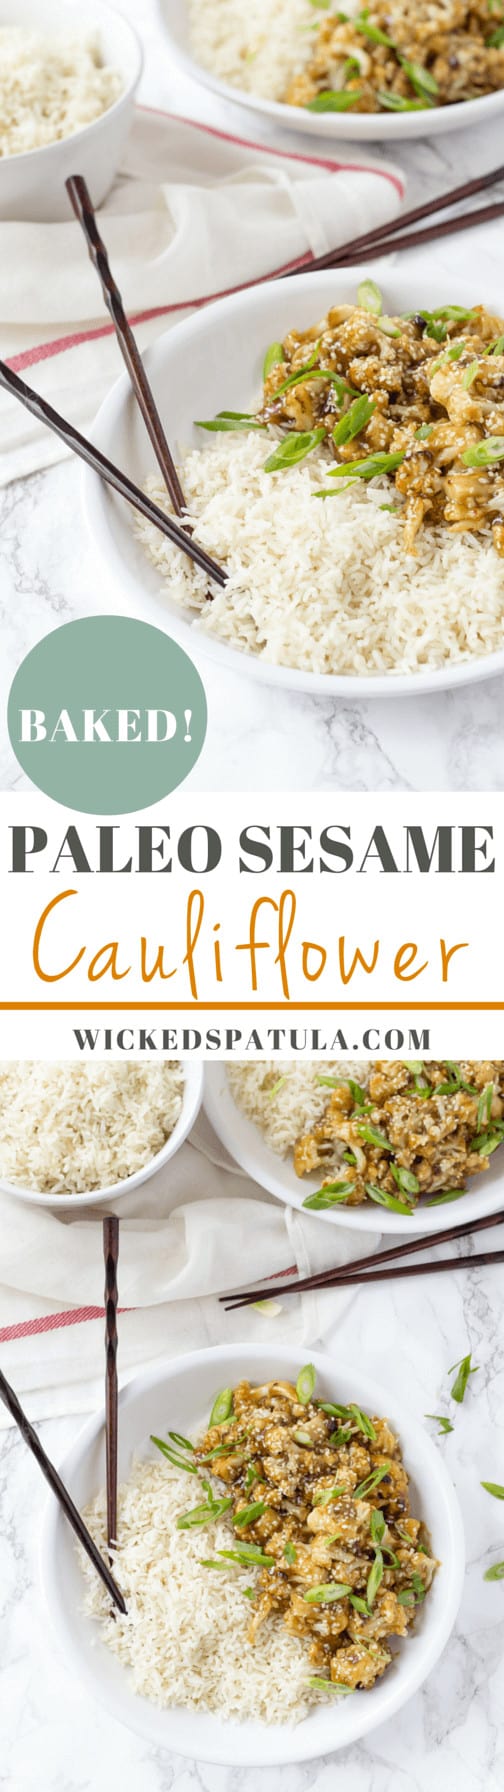 Paleo Sesame Cauliflower - These baked cauliflower nuggets take the place of chicken in this classic recipe!